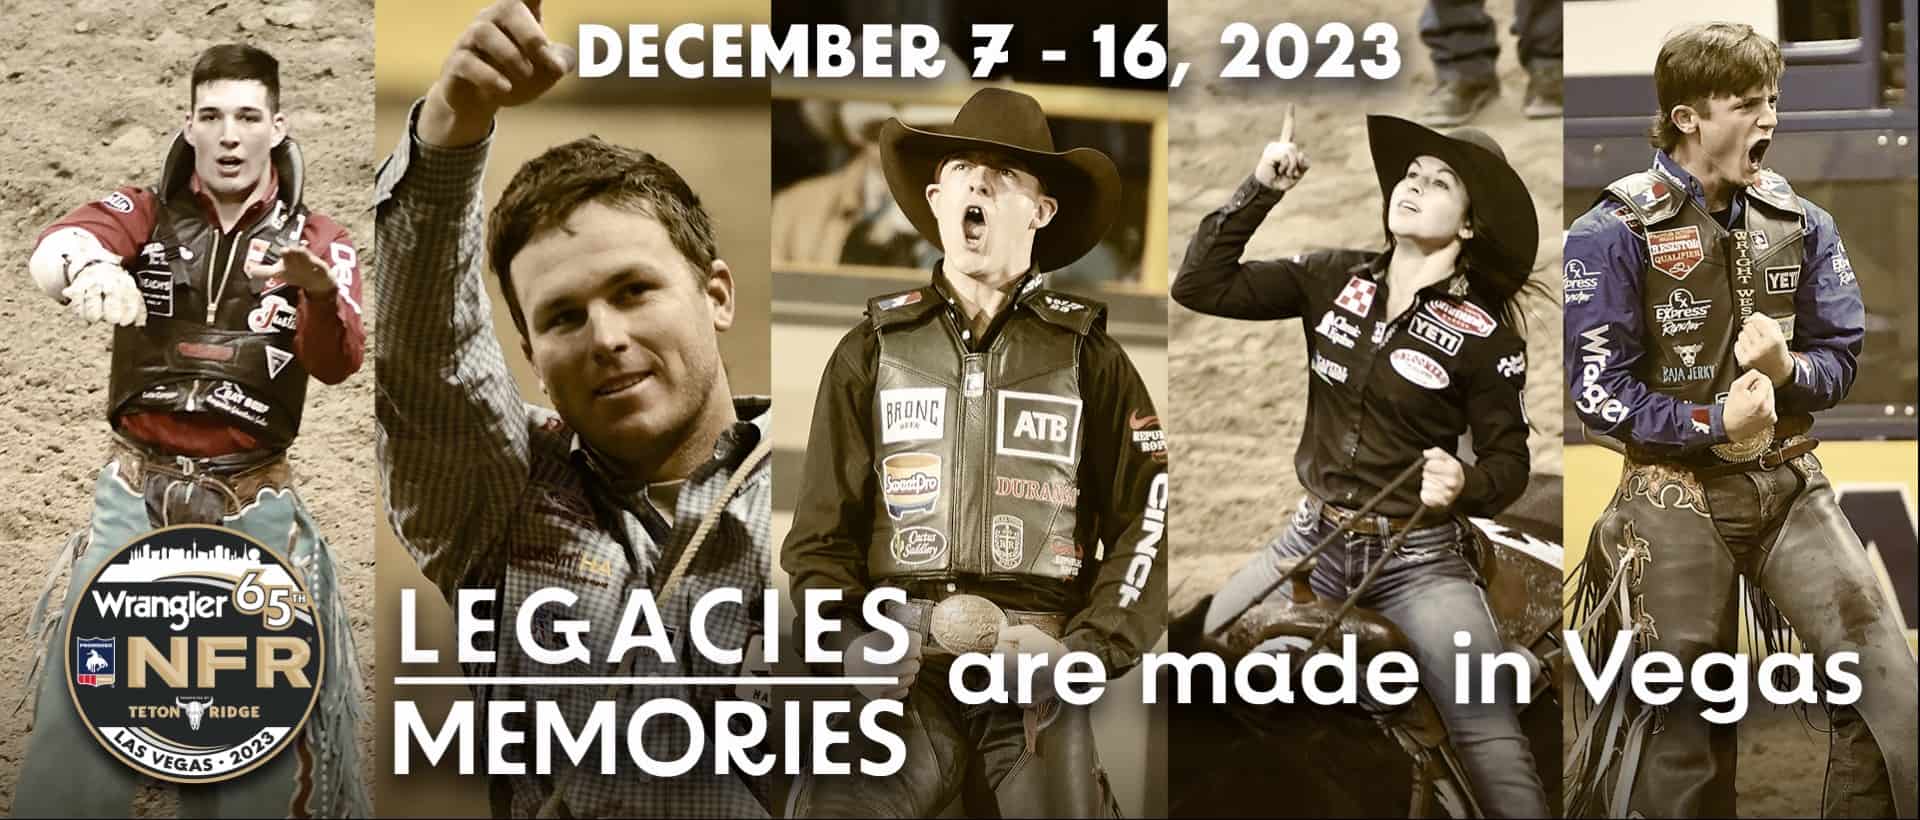 How to Watch the NFR 2023: Live and Streaming – American Hat Makers